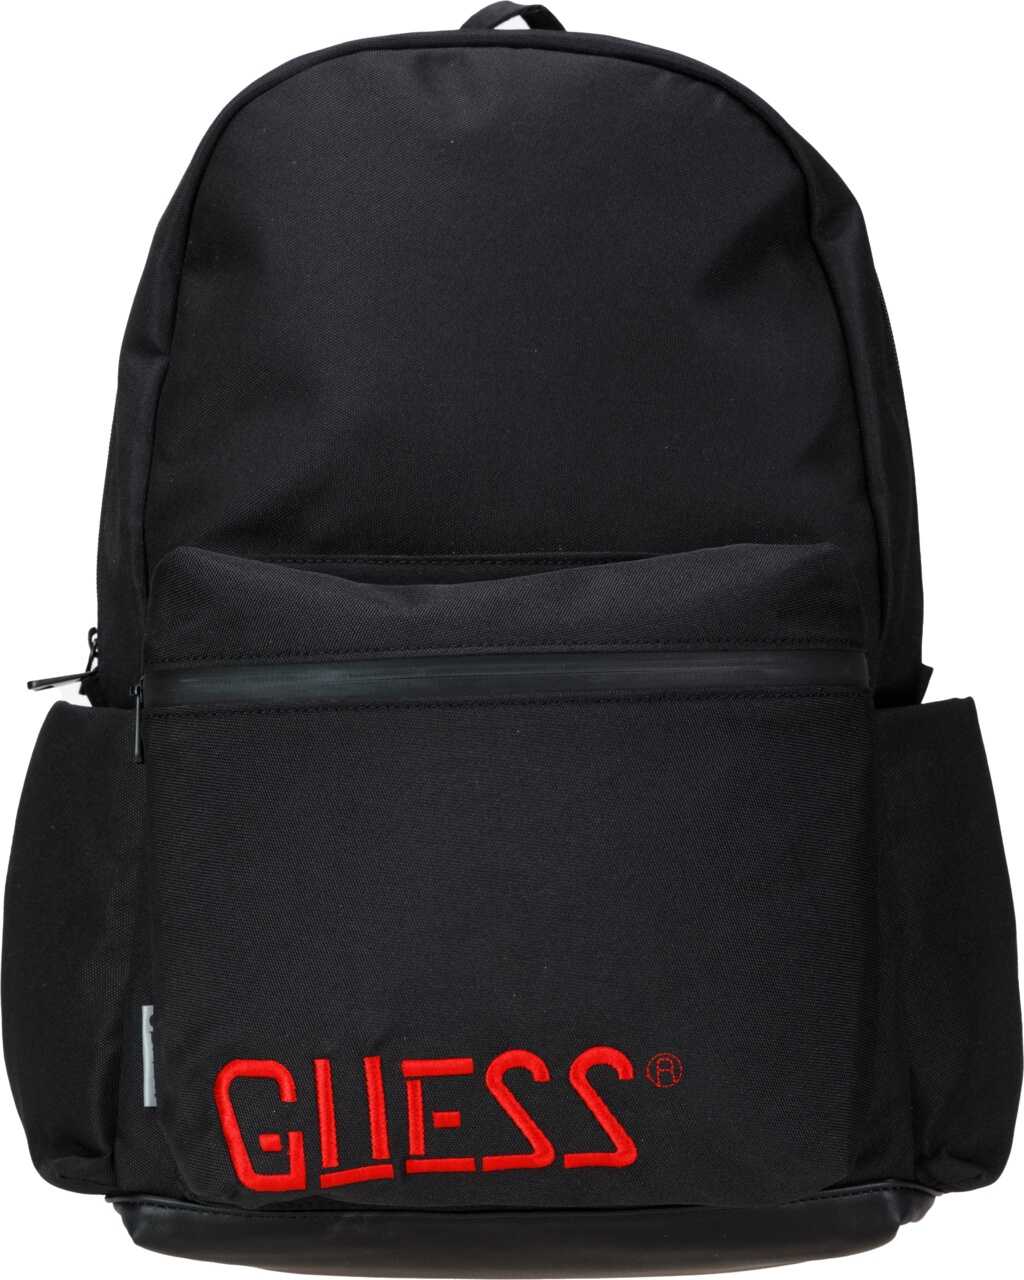 GUESS Vice Easy Squared Backpack Black